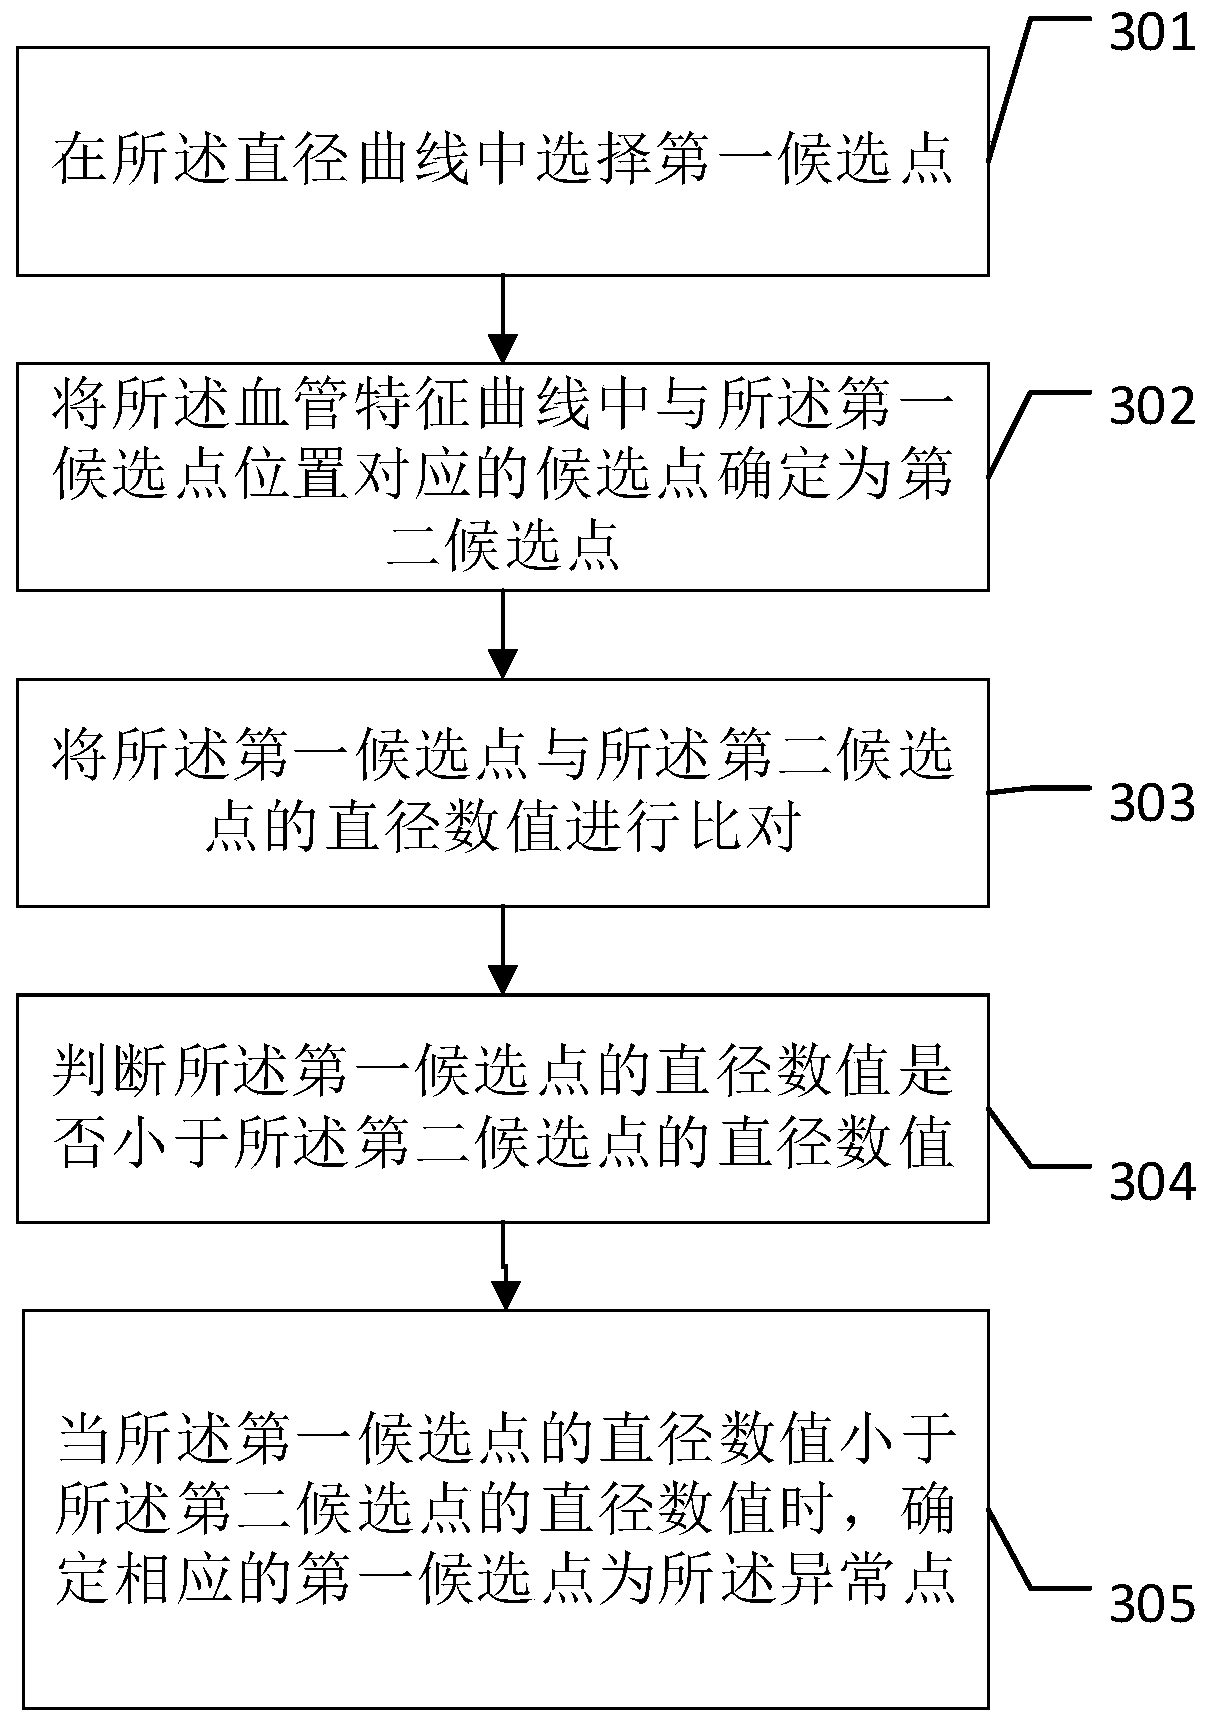 Blood vessel abnormity detection method and device and computer readable storage medium